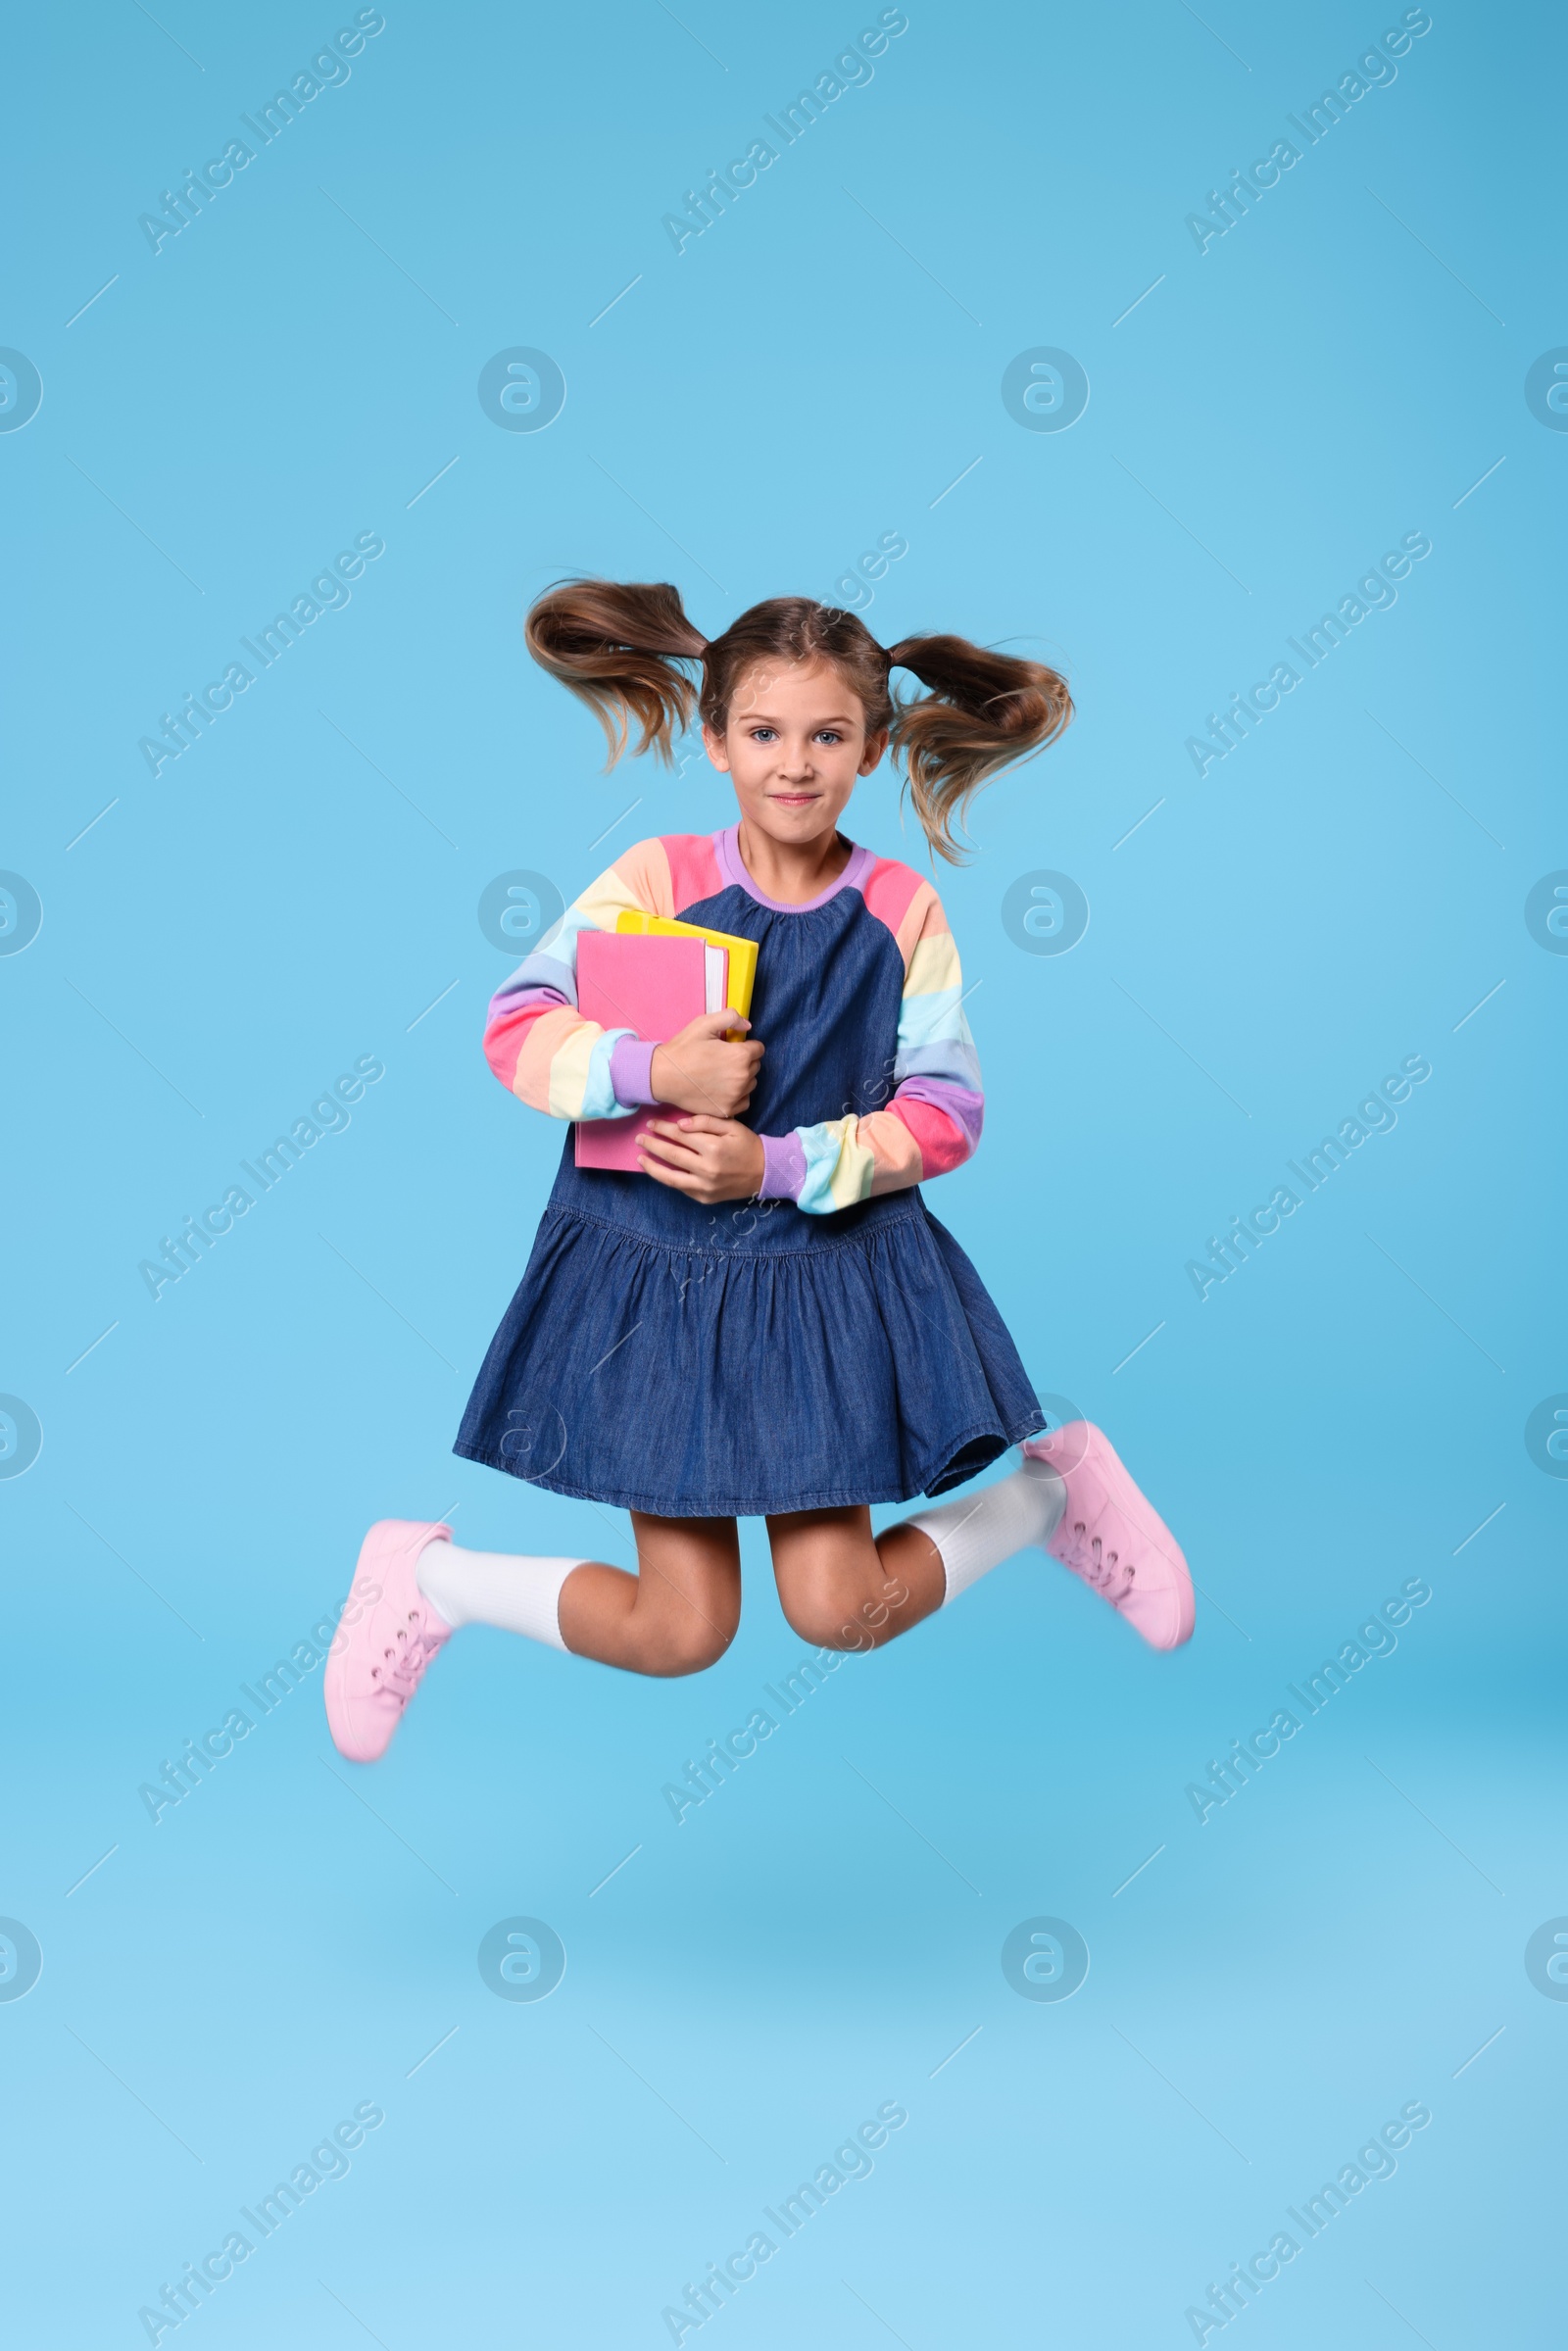 Photo of Cute schoolgirl with books jumping on light blue background